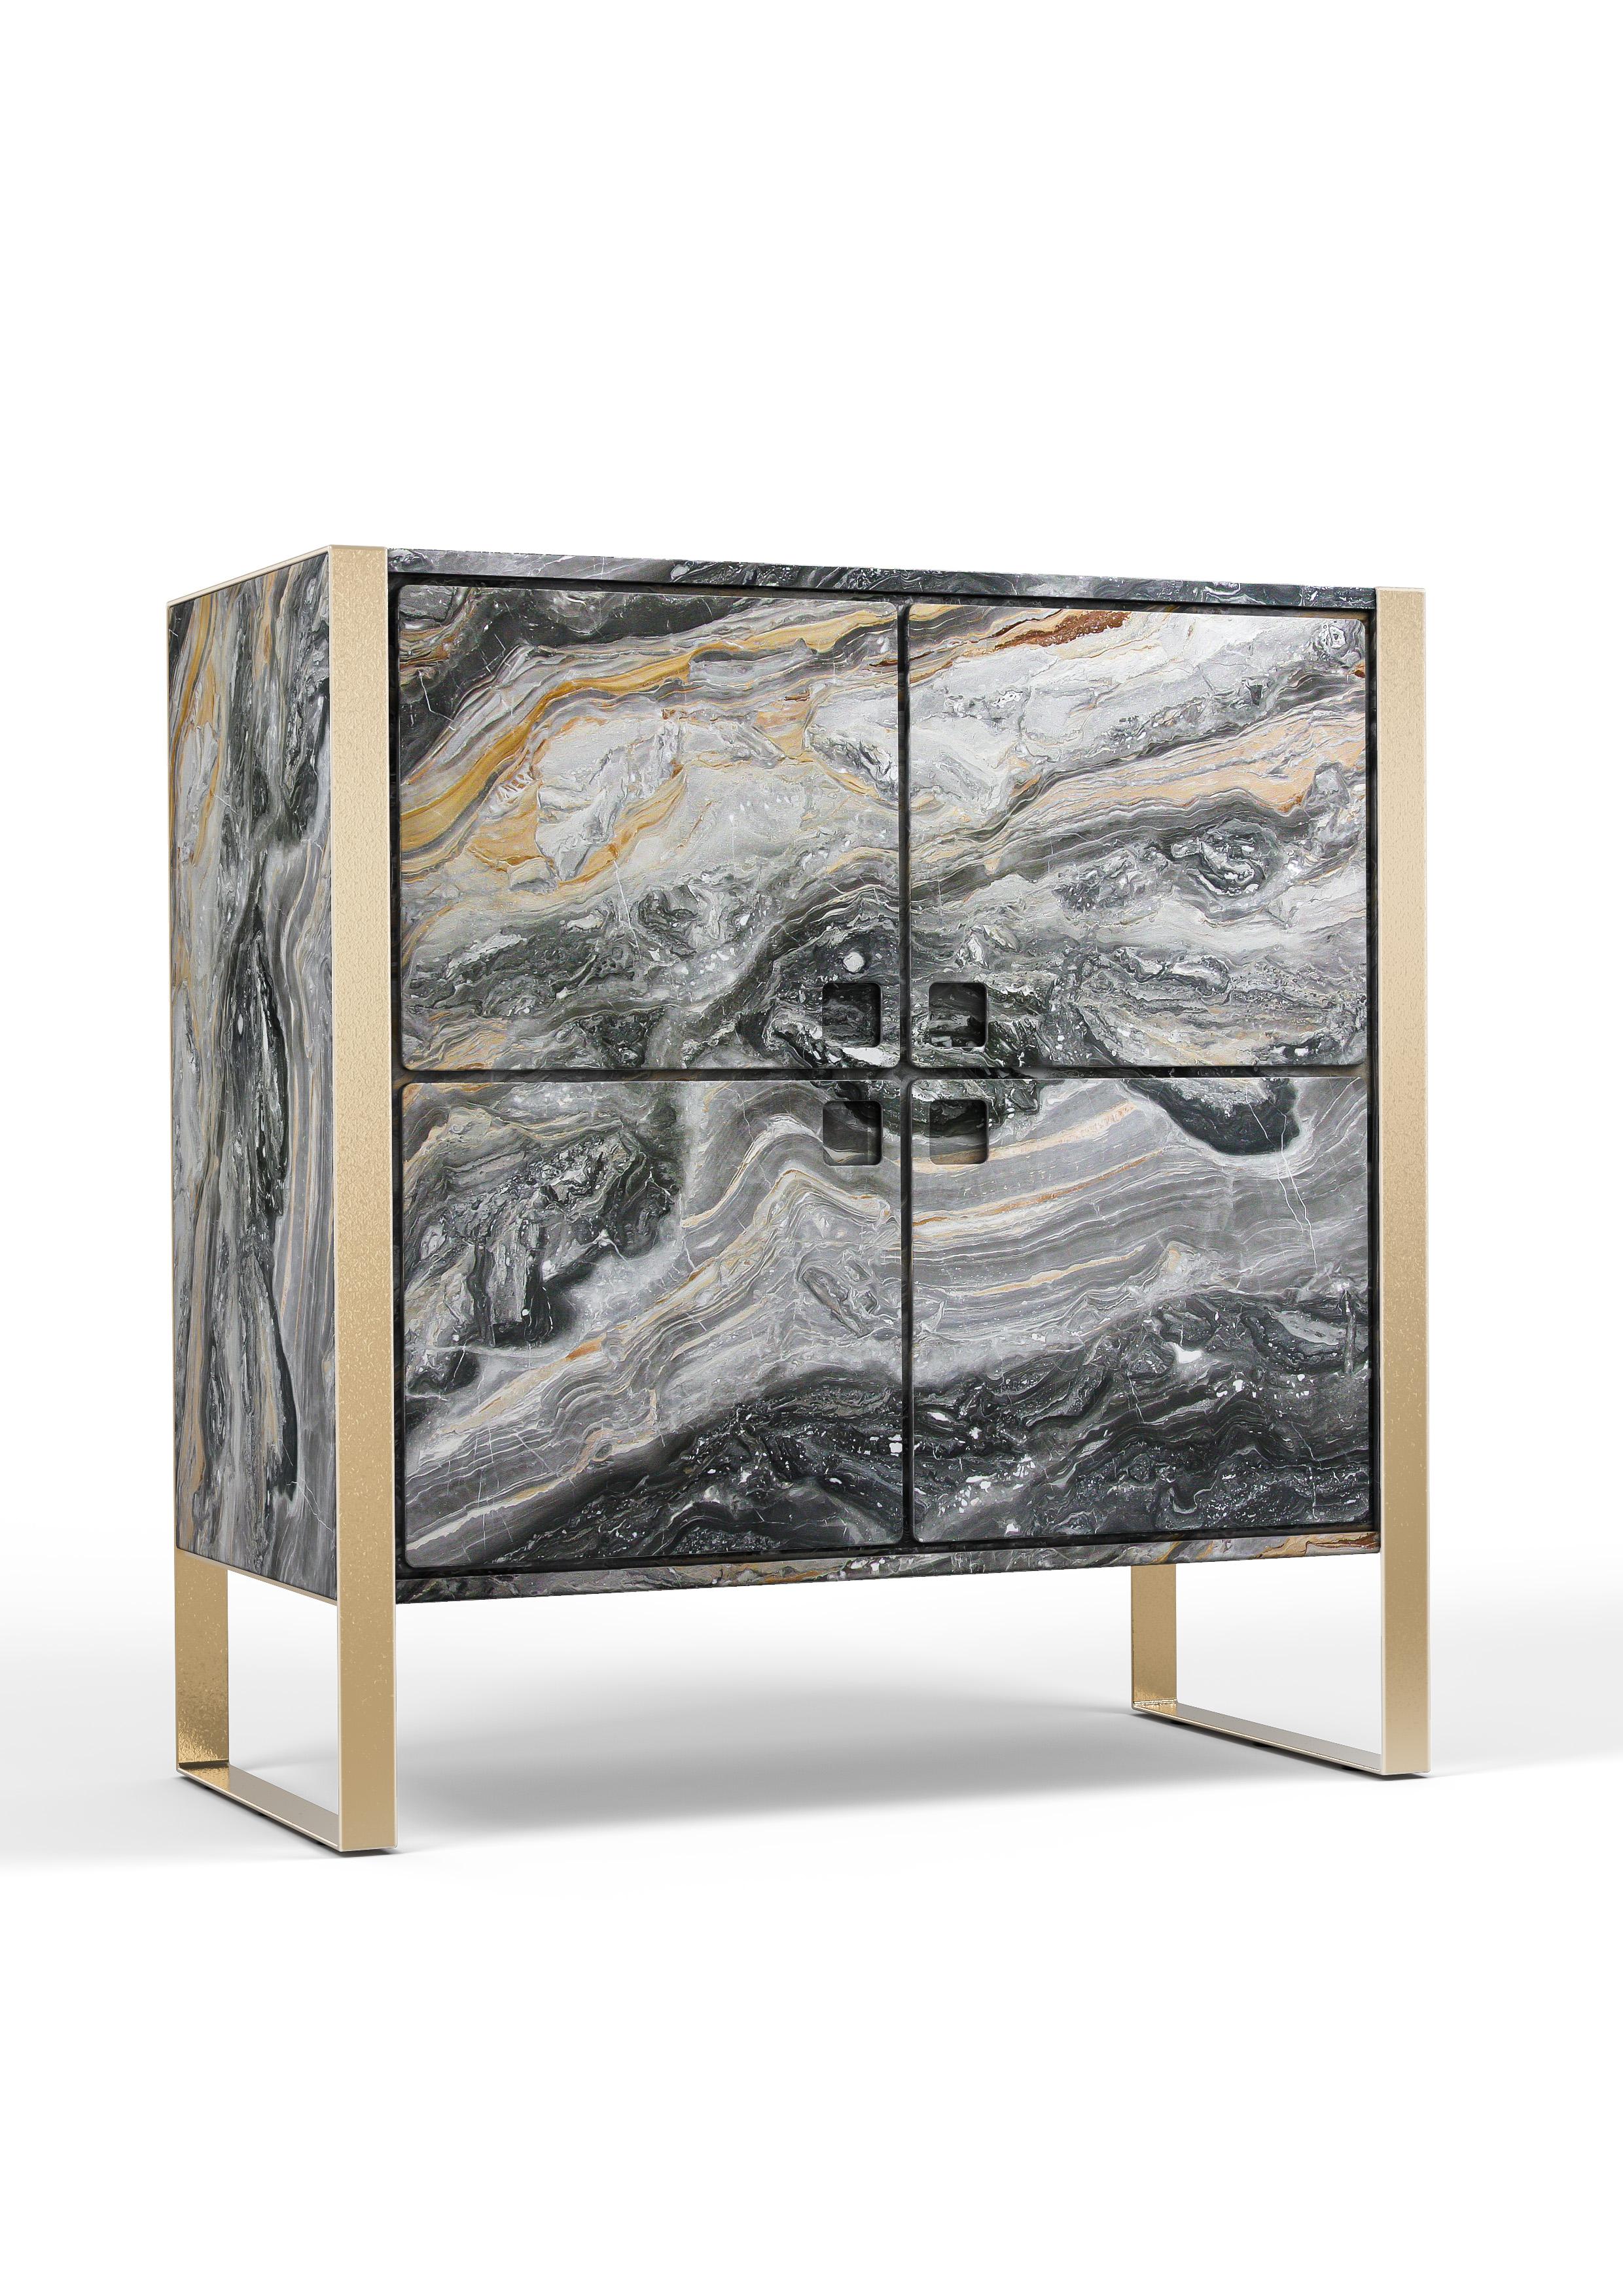 Aida cabinet by Marmi Serafini
Materials: Marble and brass
Dimensions: 160 x 100 x 170 cm


Squared and simple lines enriched with a sophisticated metal structure are allowing the true essence of the material to be admired: marble.

Other marbles